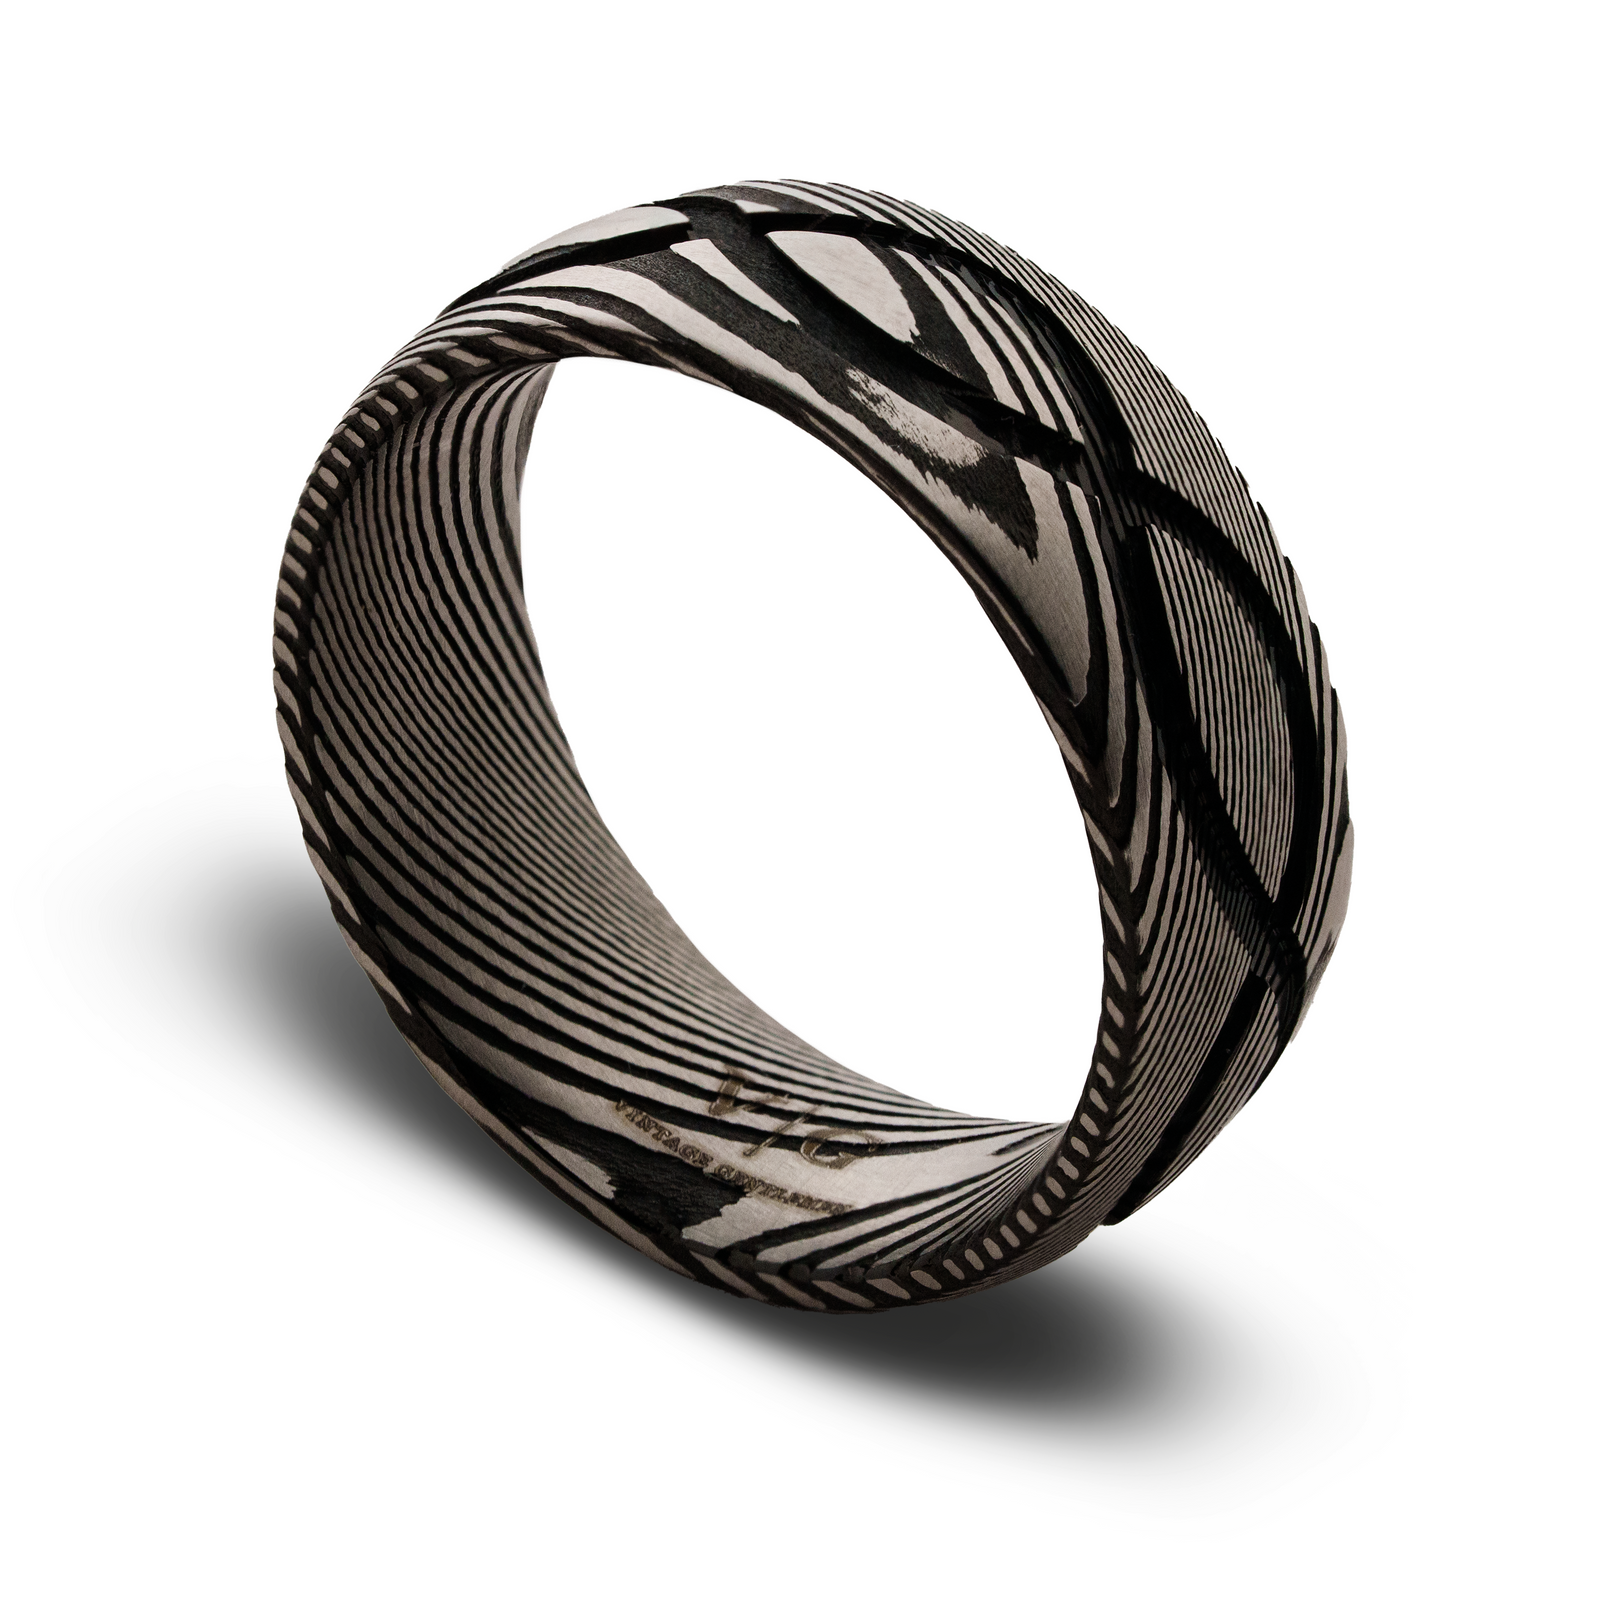 The "Labyrinth" Ring